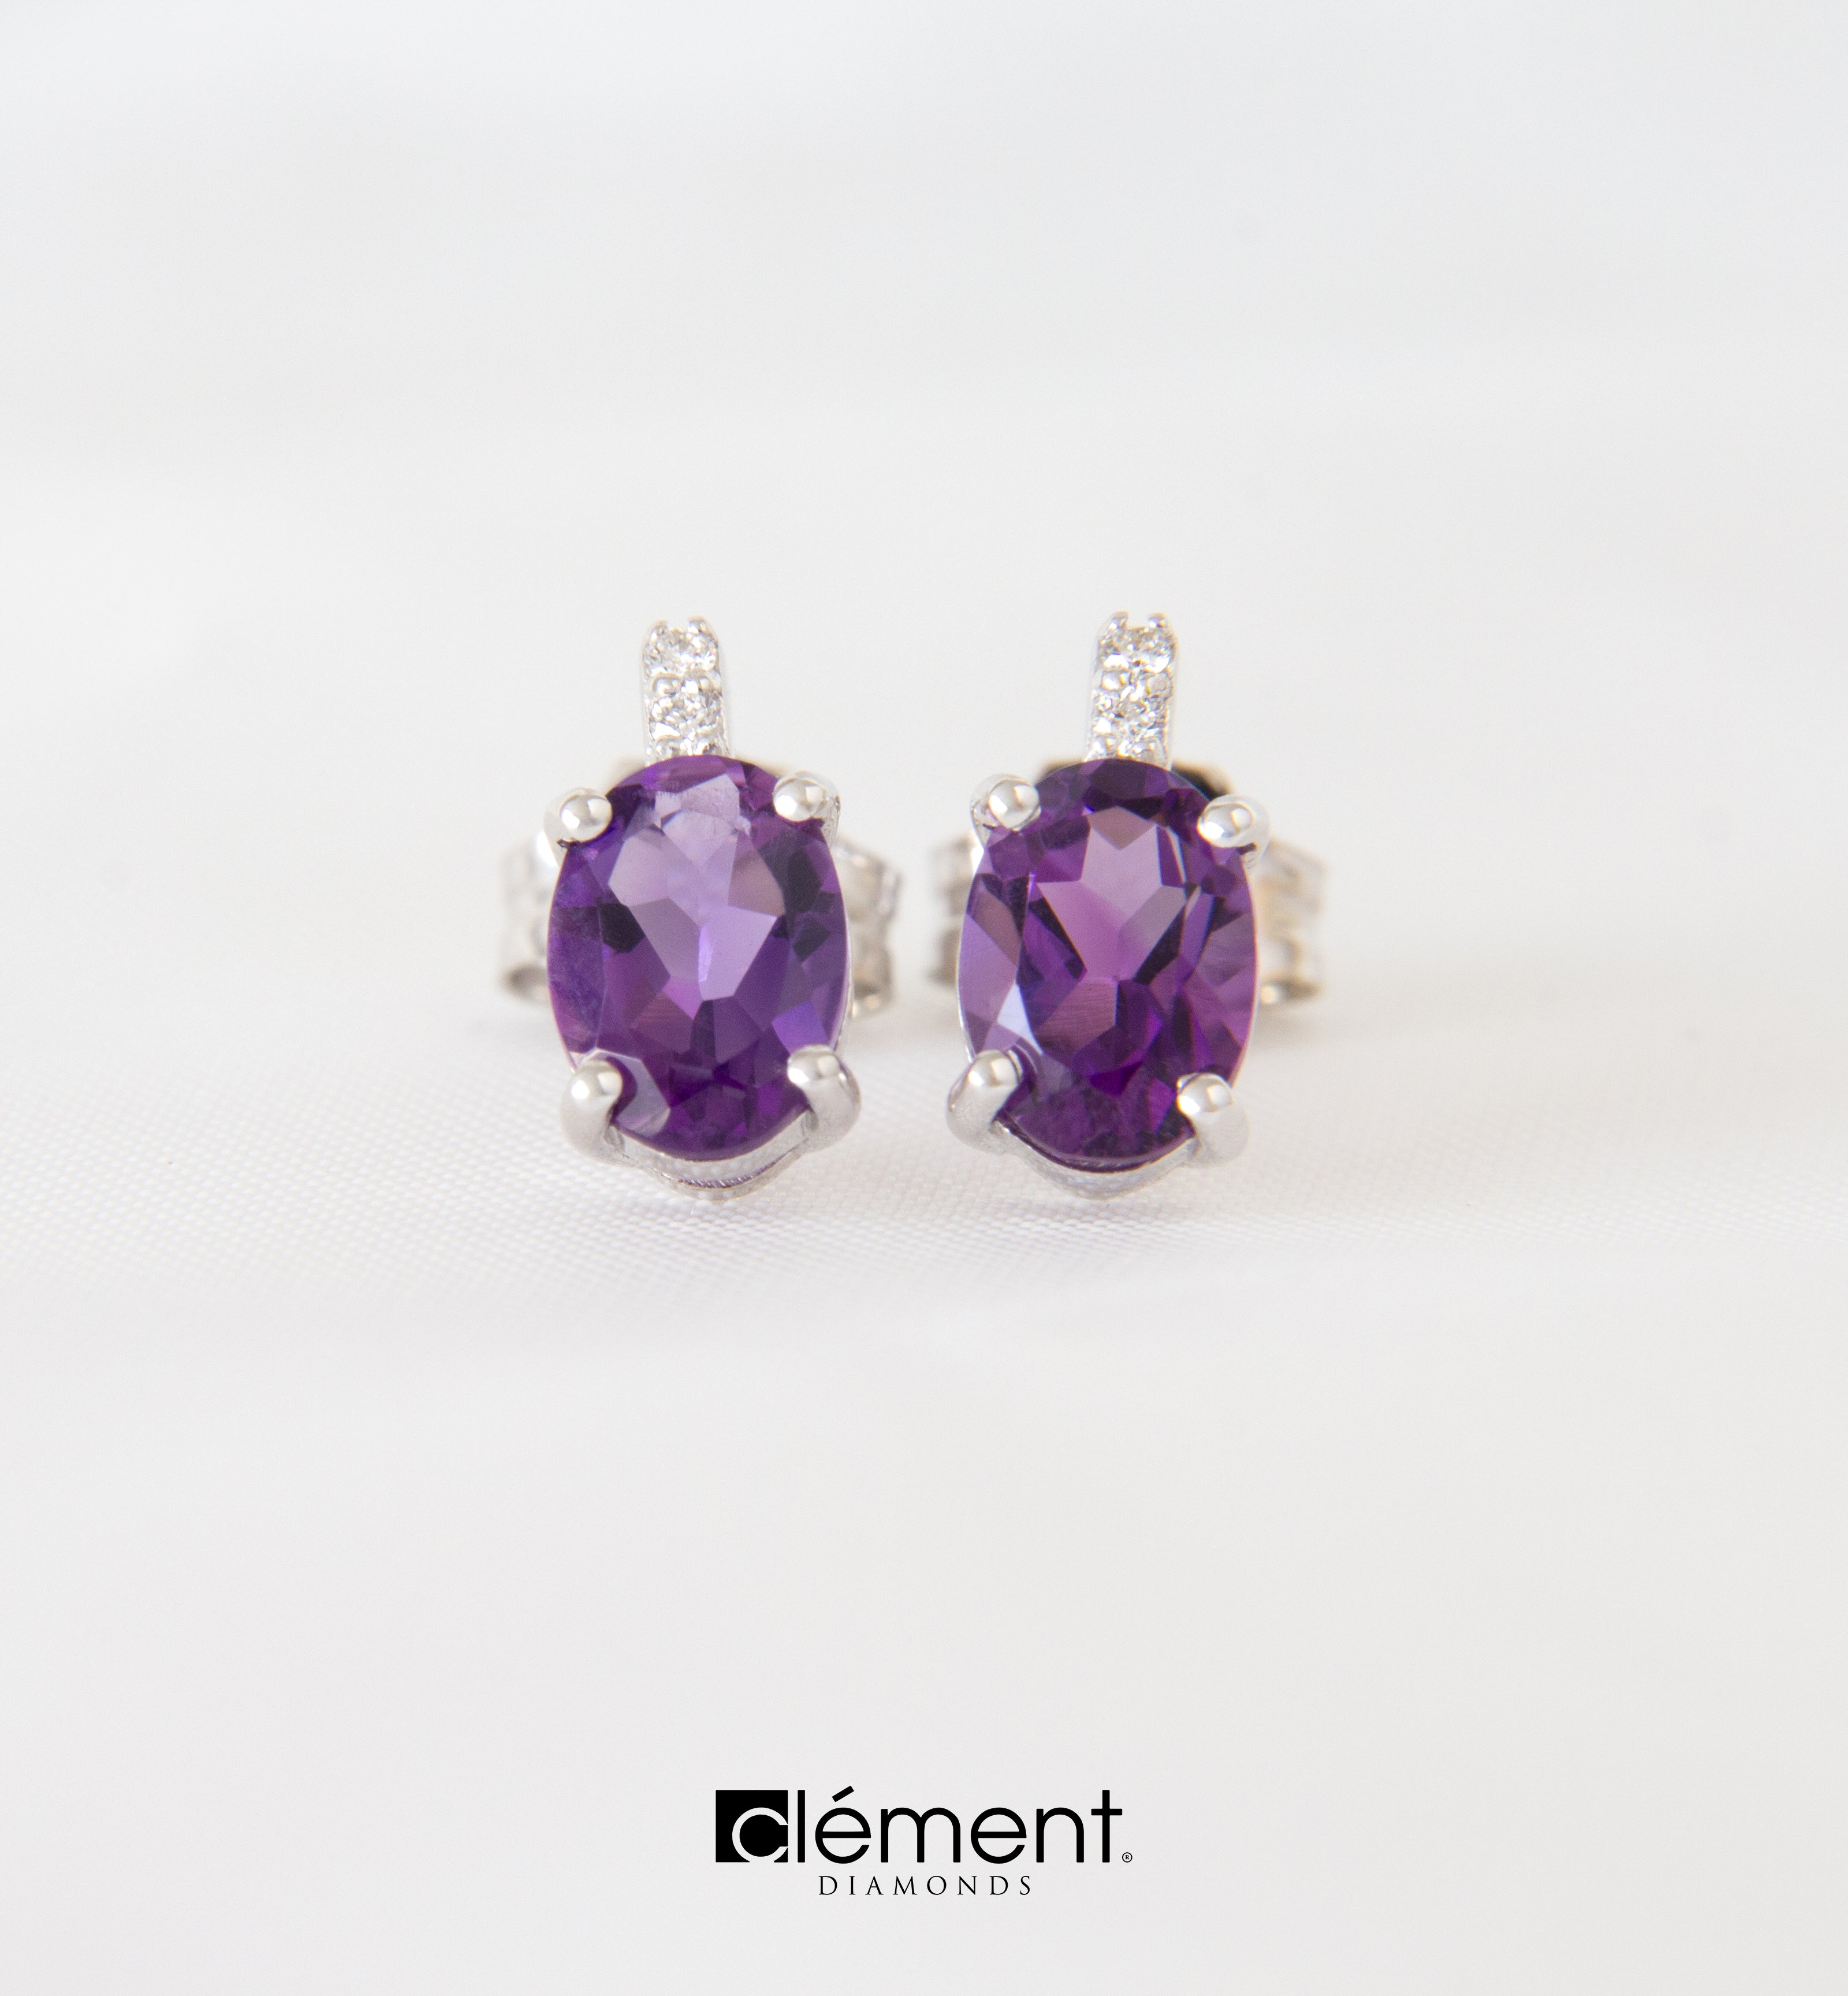 18ct White Gold Diamond and Amethyst Earrings